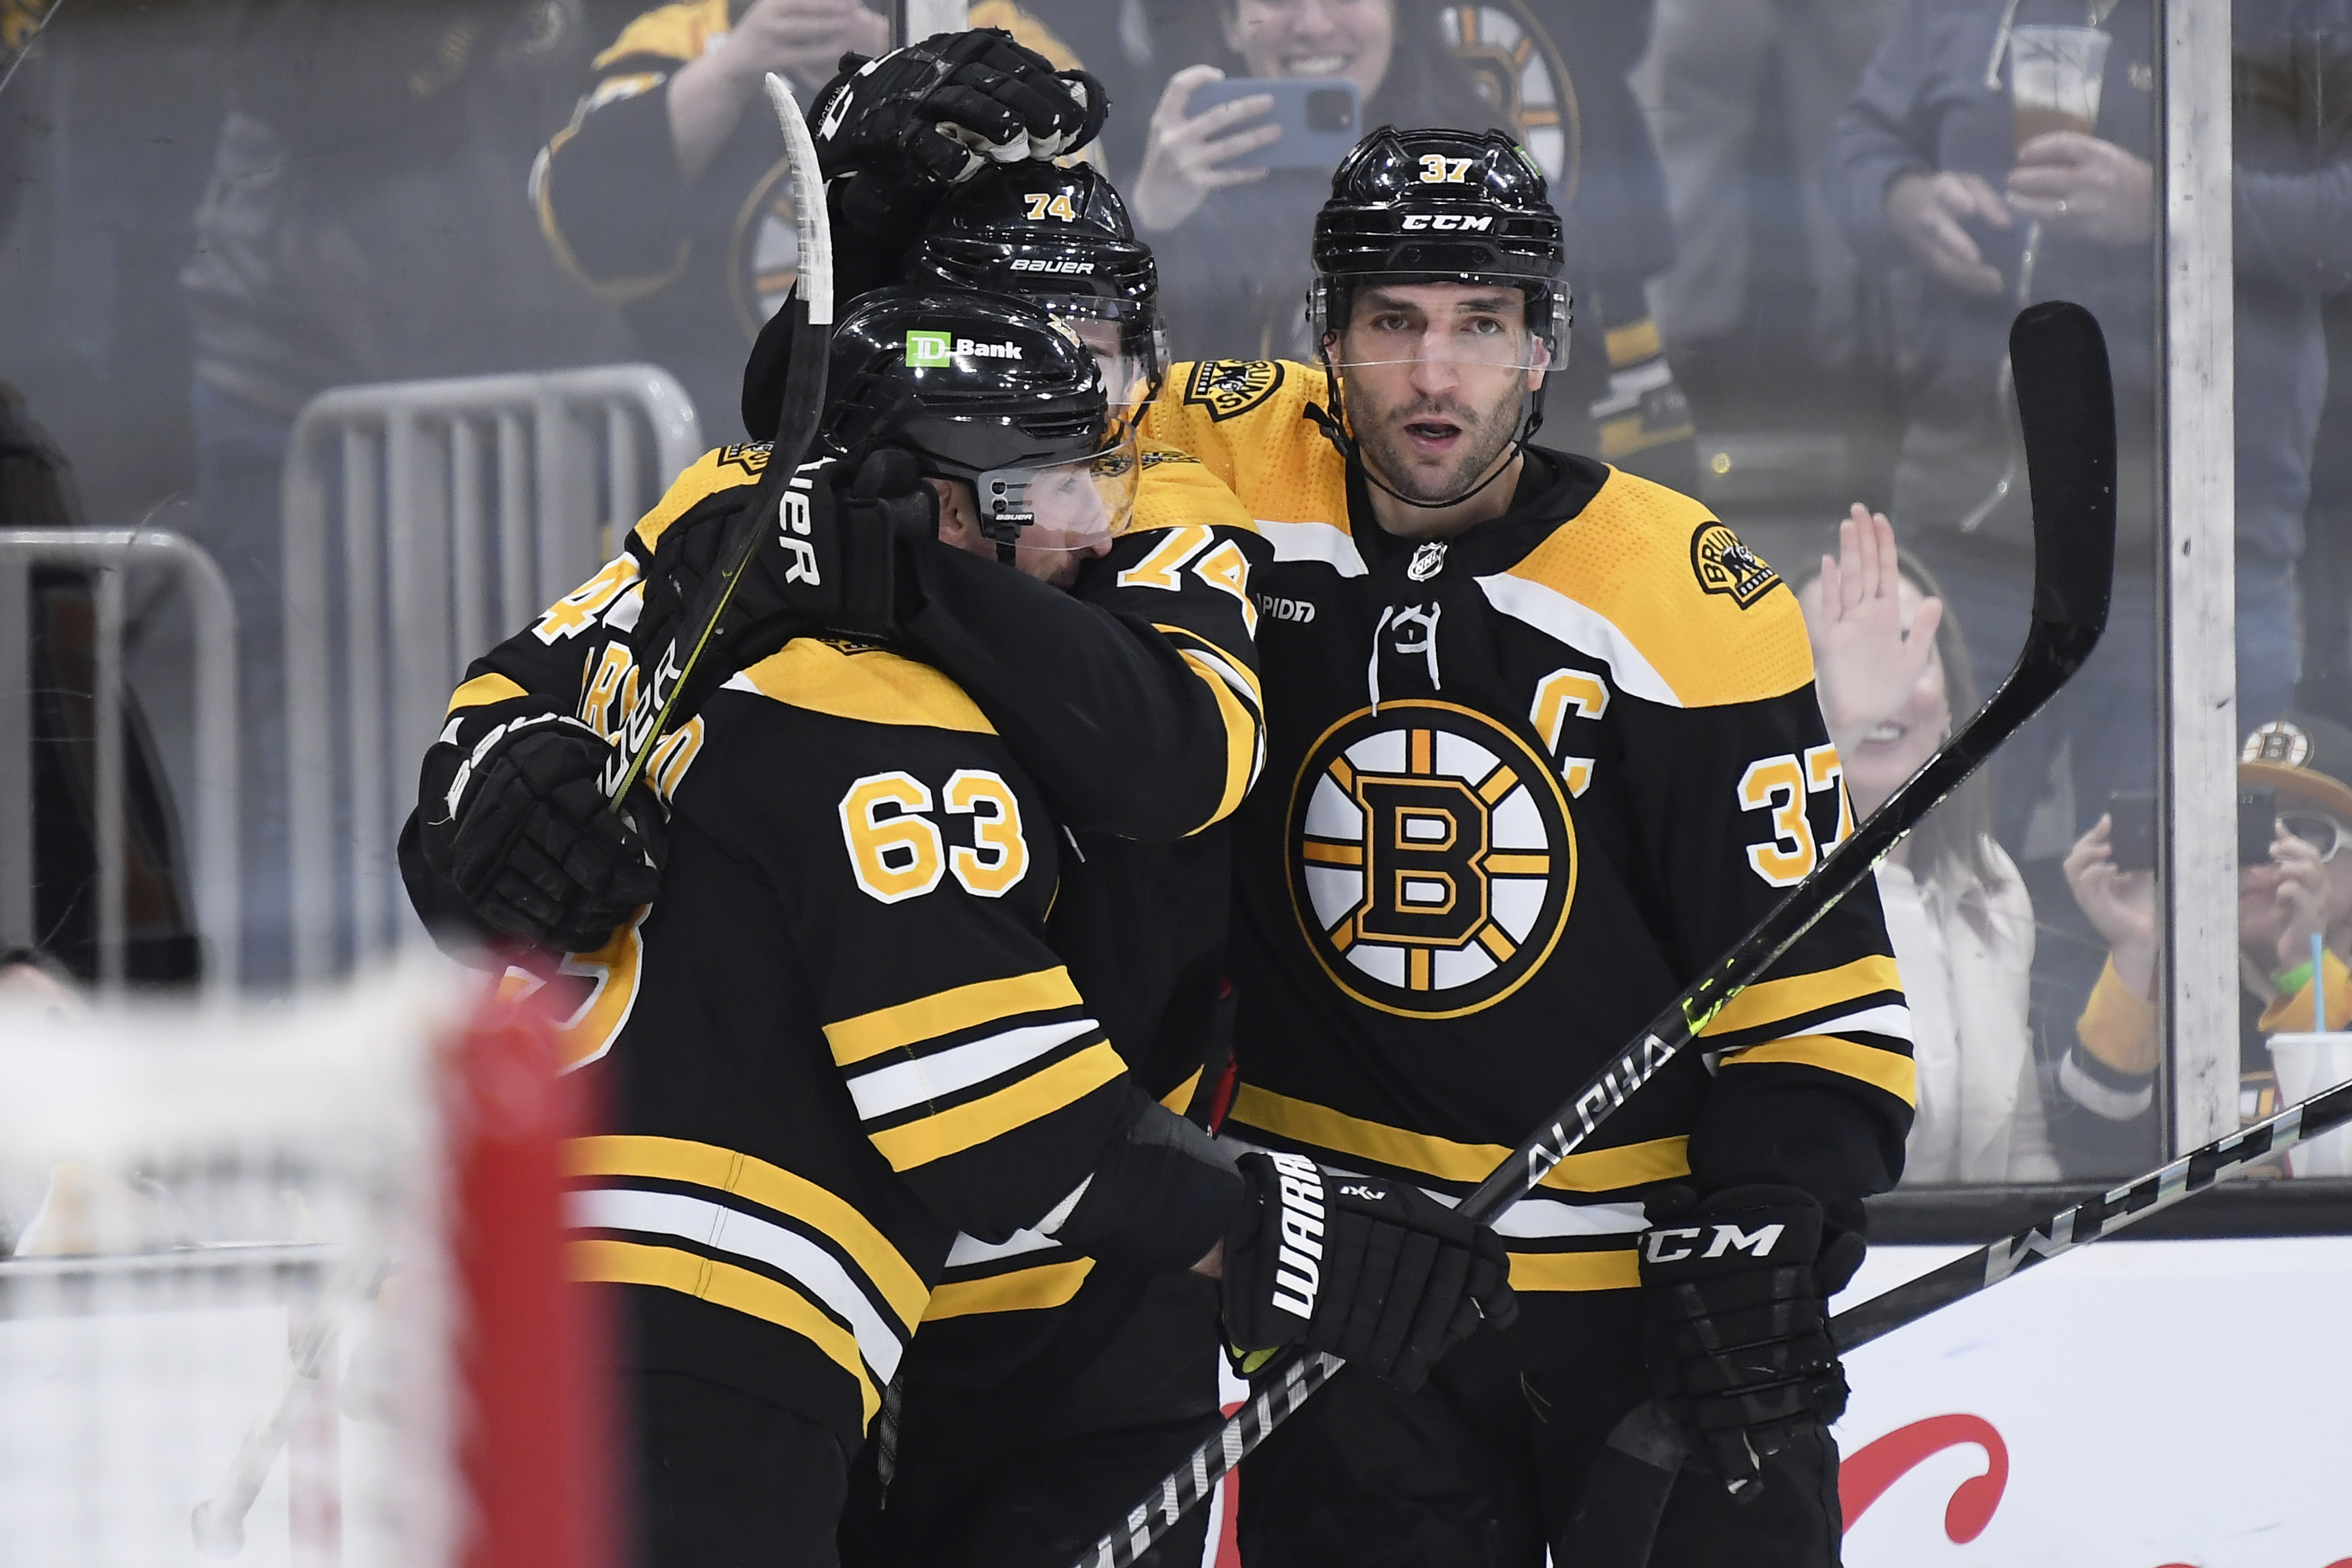 If Bergeron Retires, Who Will be the Next Boston Bruins Captain